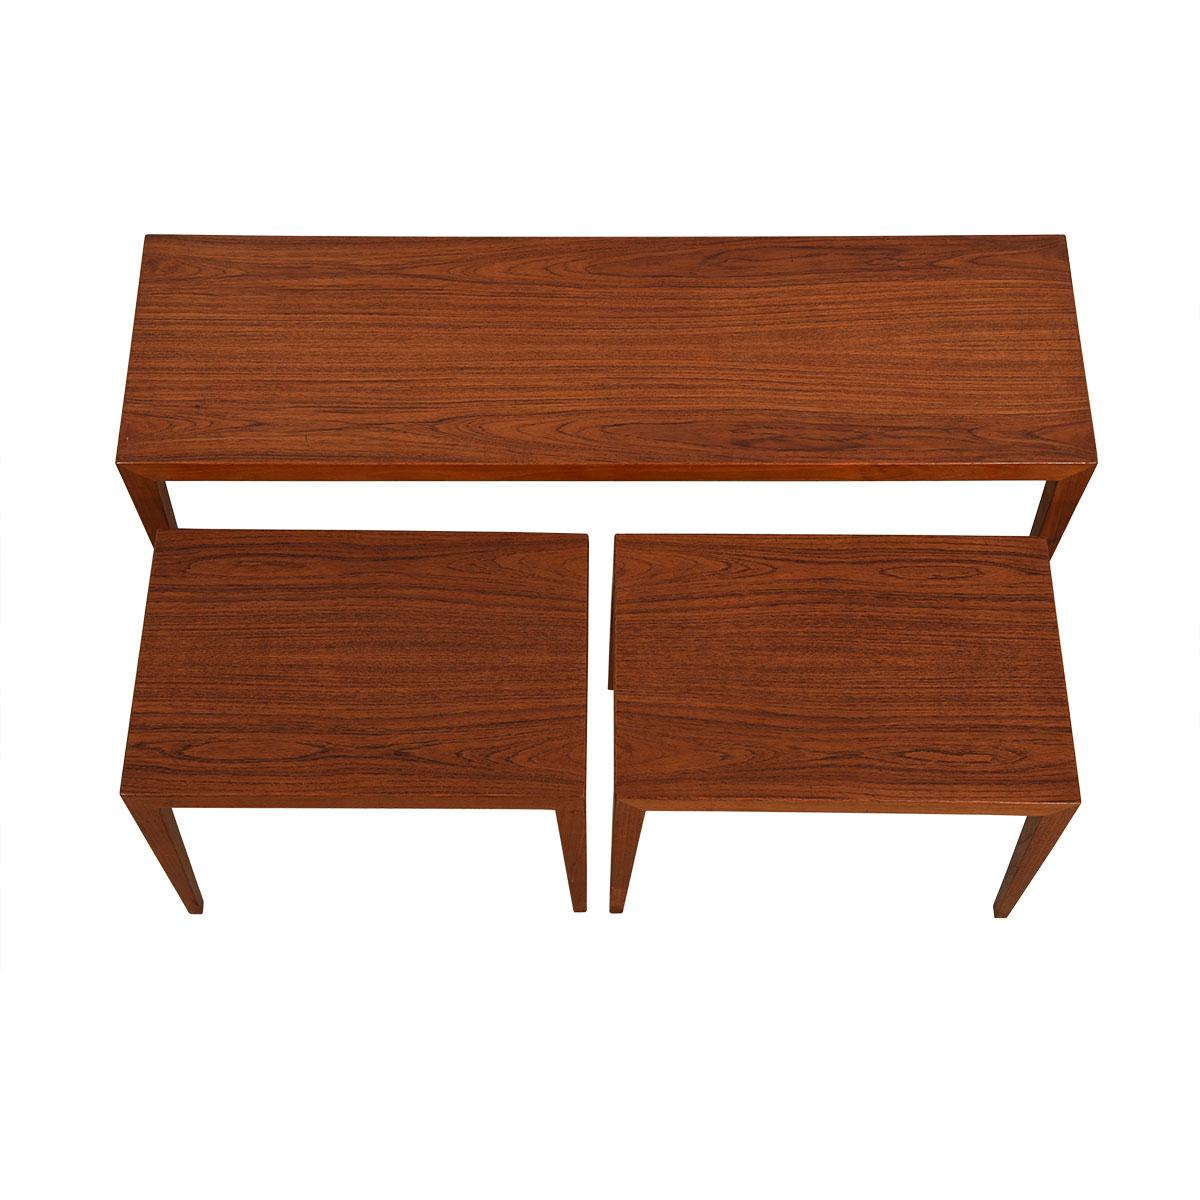 20th Century Rare Danish Teak Skinny Accent / Coffee Table with Pair Nesting Tables For Sale